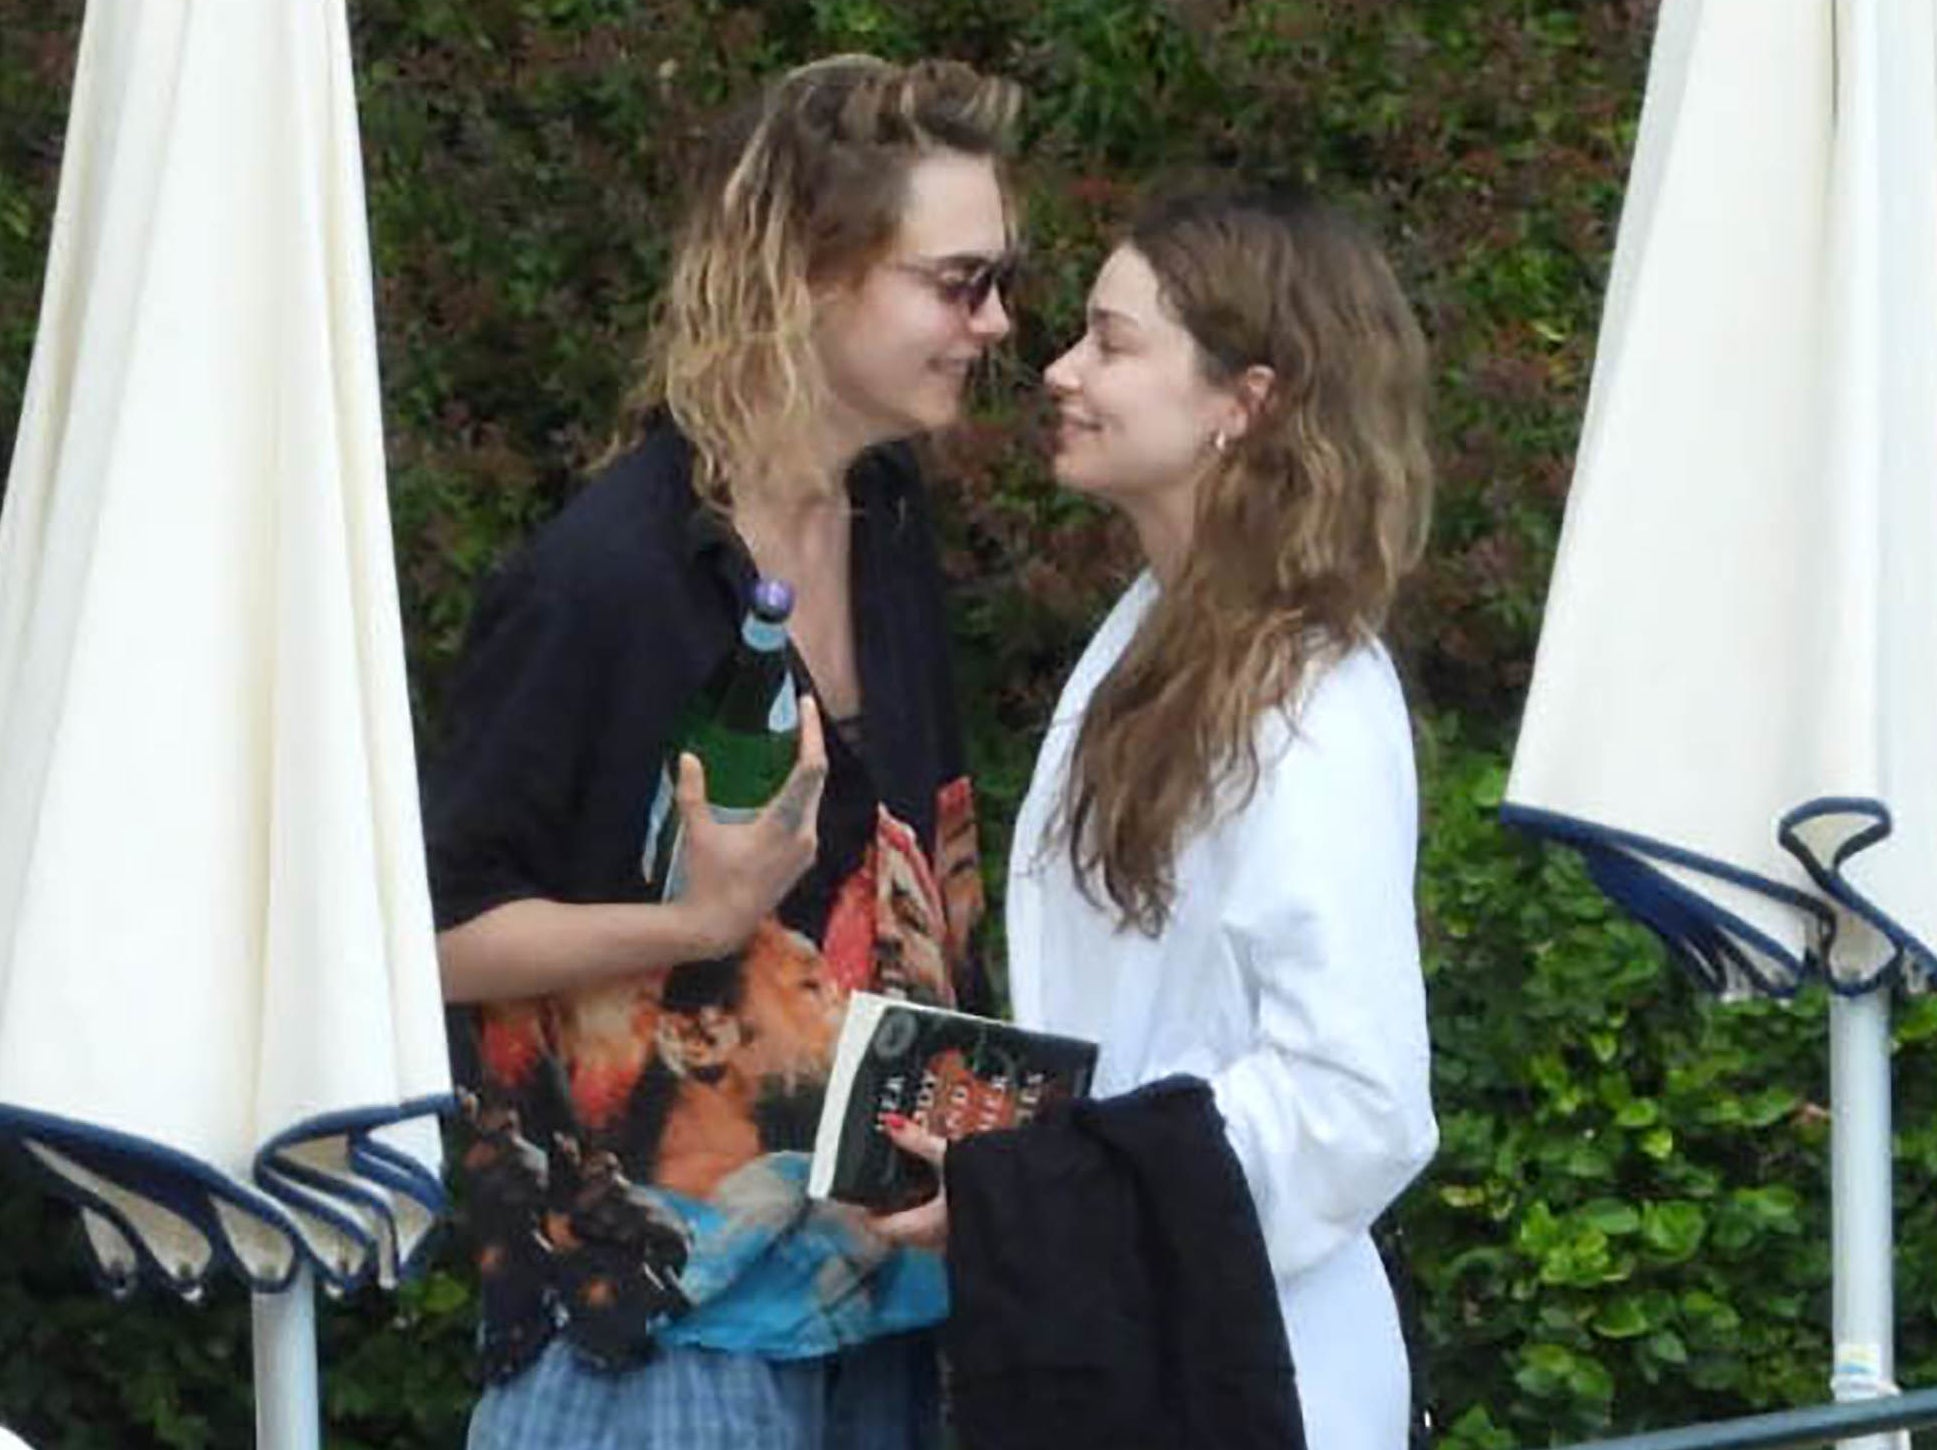 Cara and Minke smile at each other while standing outside